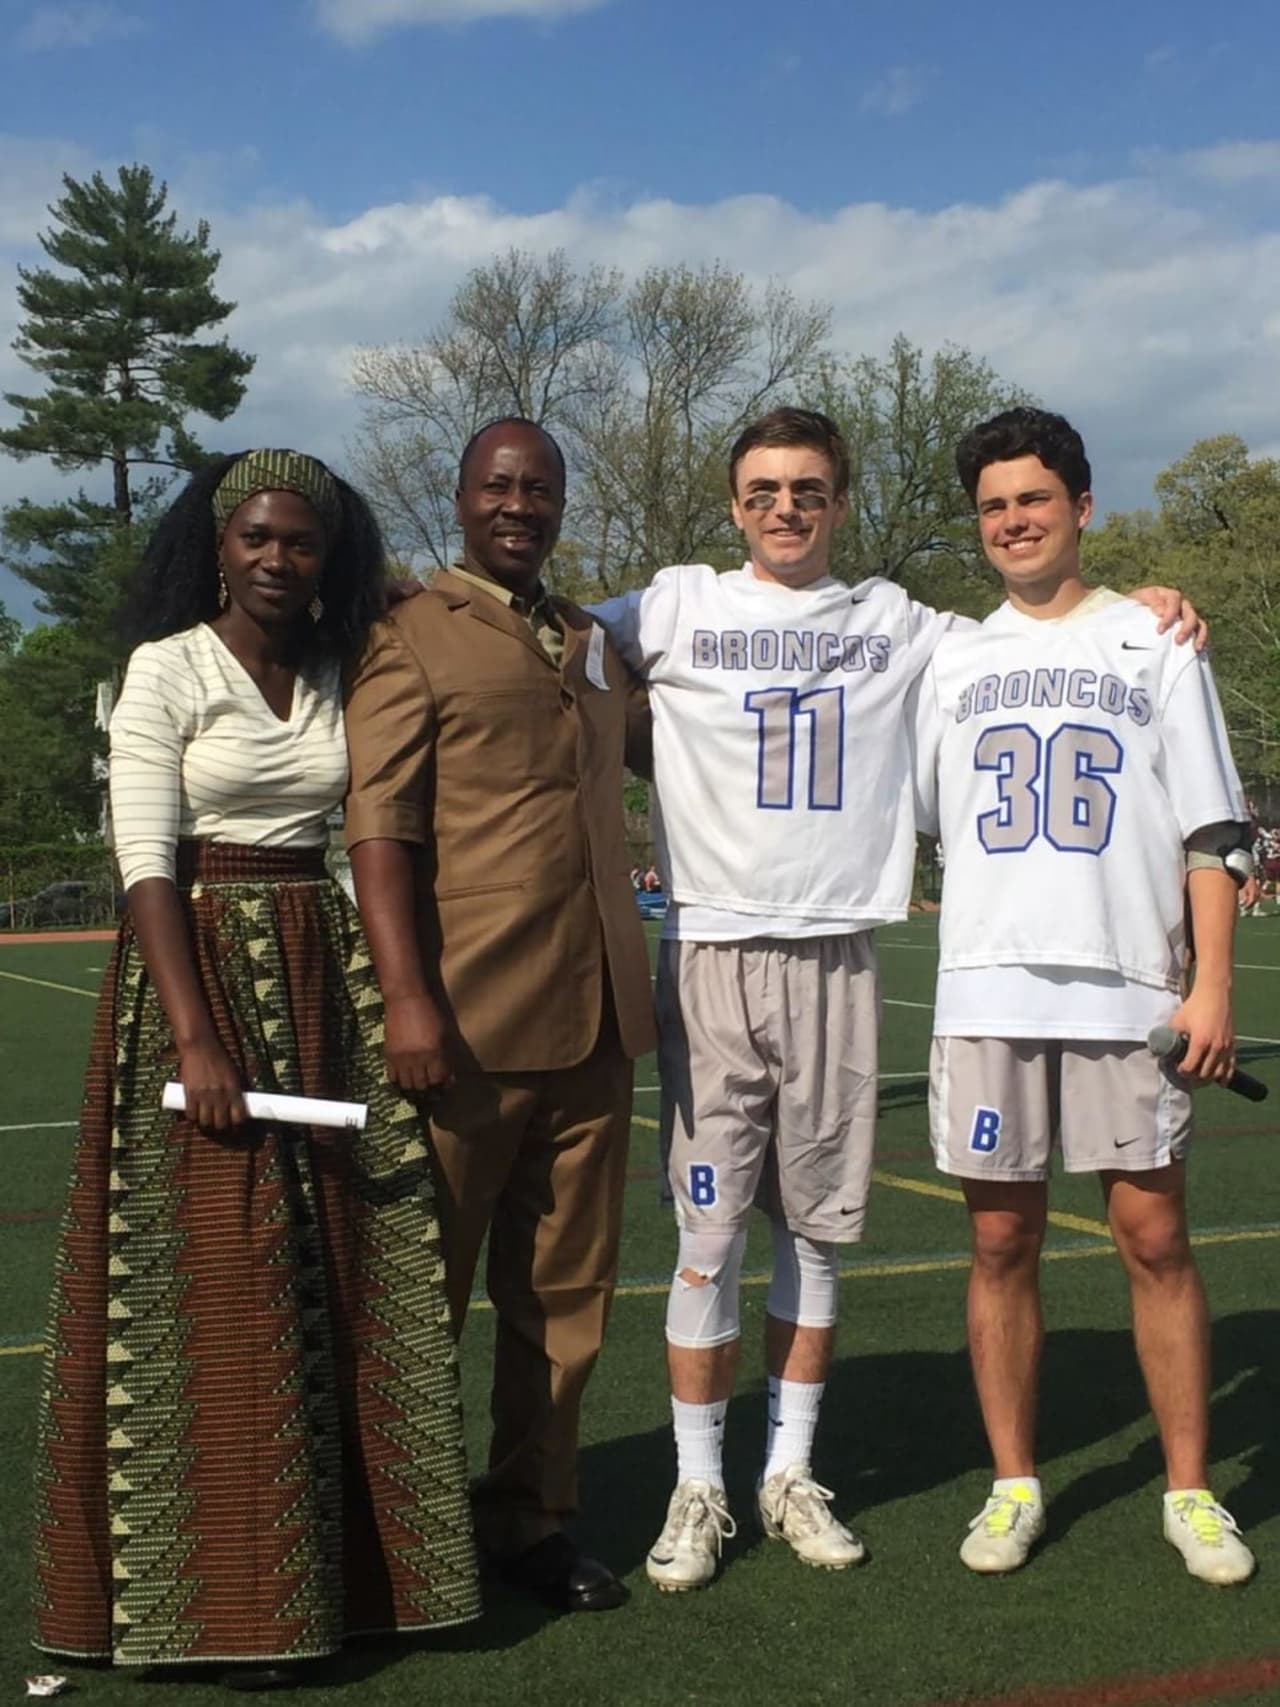 Bronxville High School seniors Nicholas O’Brien and Mac Crawford with two teachers from MainSprings during their May 7 lacrosse game.